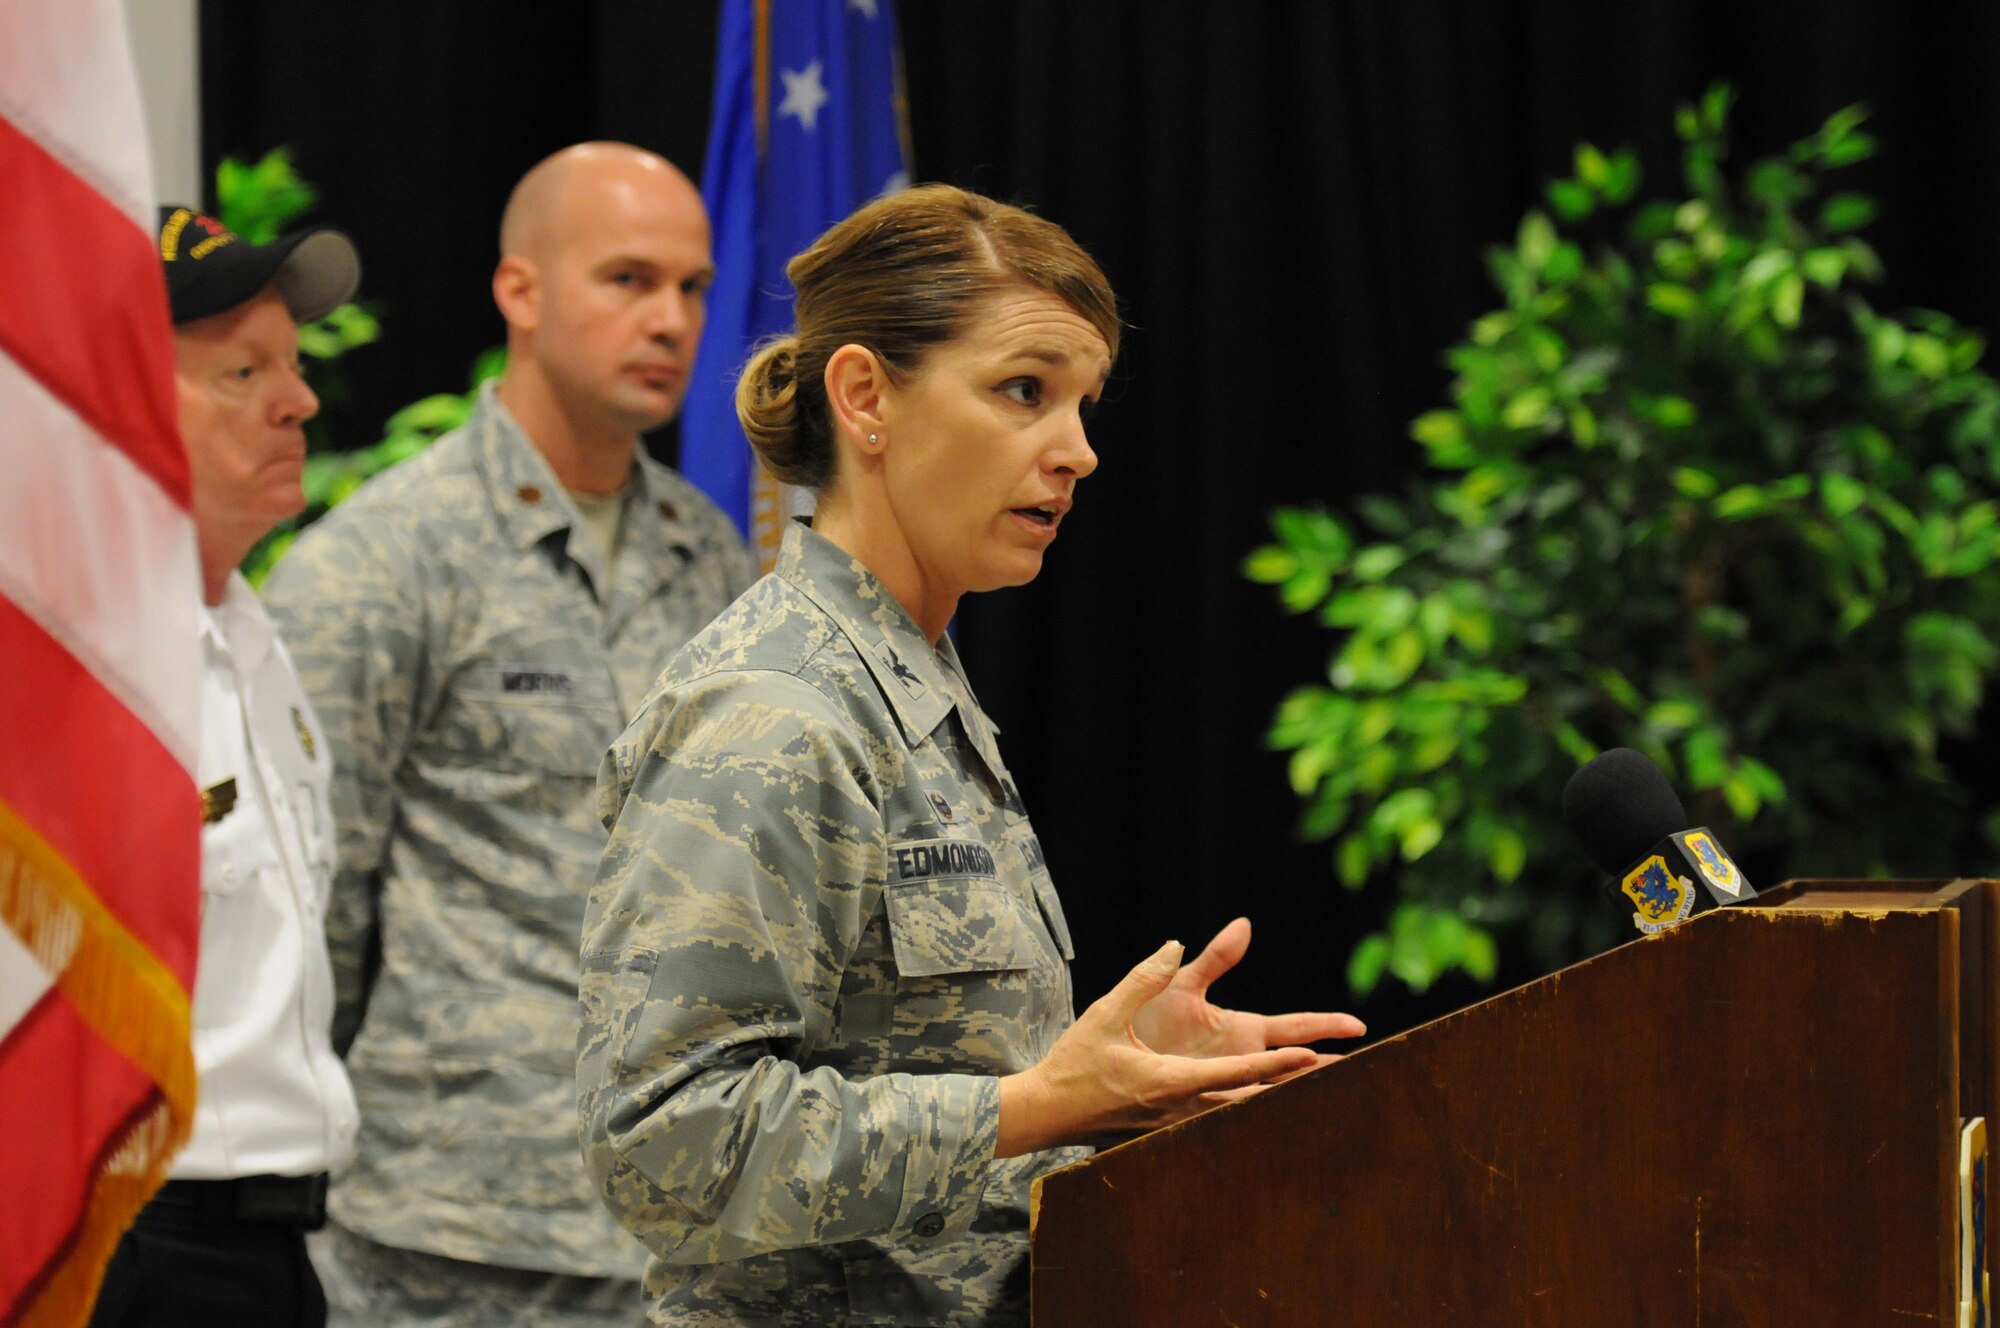 Col. Michele Edmondson, 81st Training Wing commander, makes a statement during a mock press conference at Wall Studio during Keesler's active shooter exercise Mar. 17, 2016, Keesler Air Force Base, Miss.  An active duty Air Force member simulated opening fire at the hospital in order to test the base's ability to respond to and recover from a mass casualty event. (U.S. Air Force photo by Kemberly Groue) 